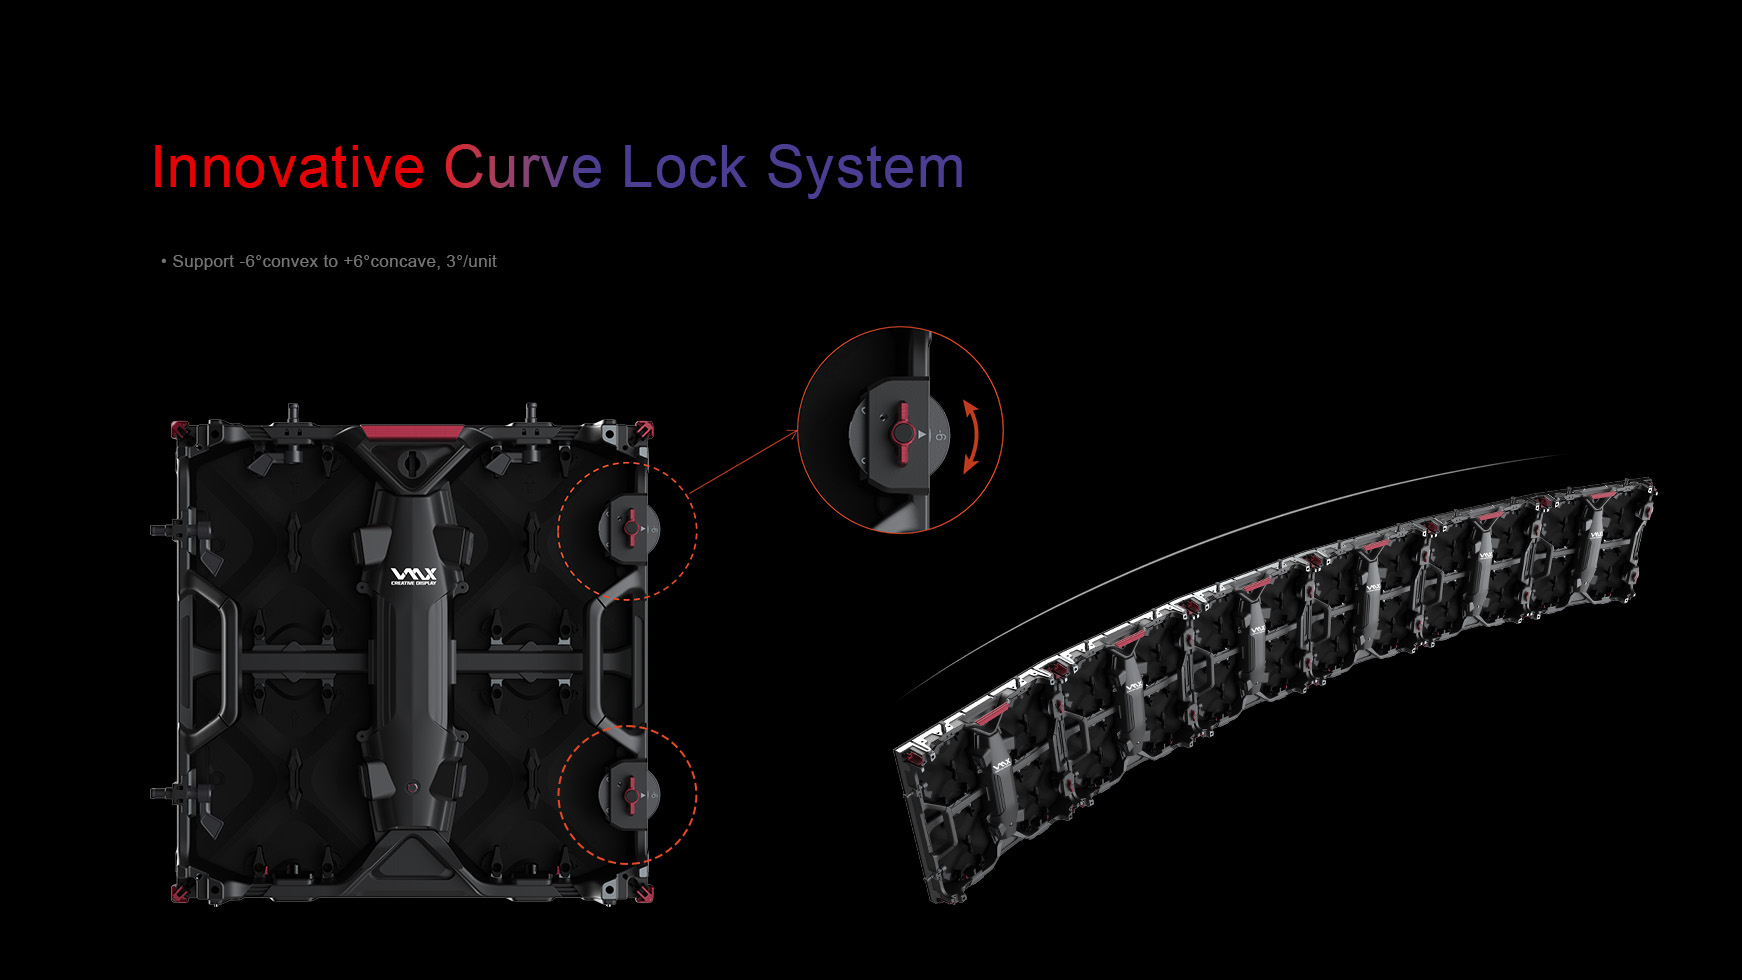 Innovative curve lock system, Support -6°convex to +6°concave, 3°/unit